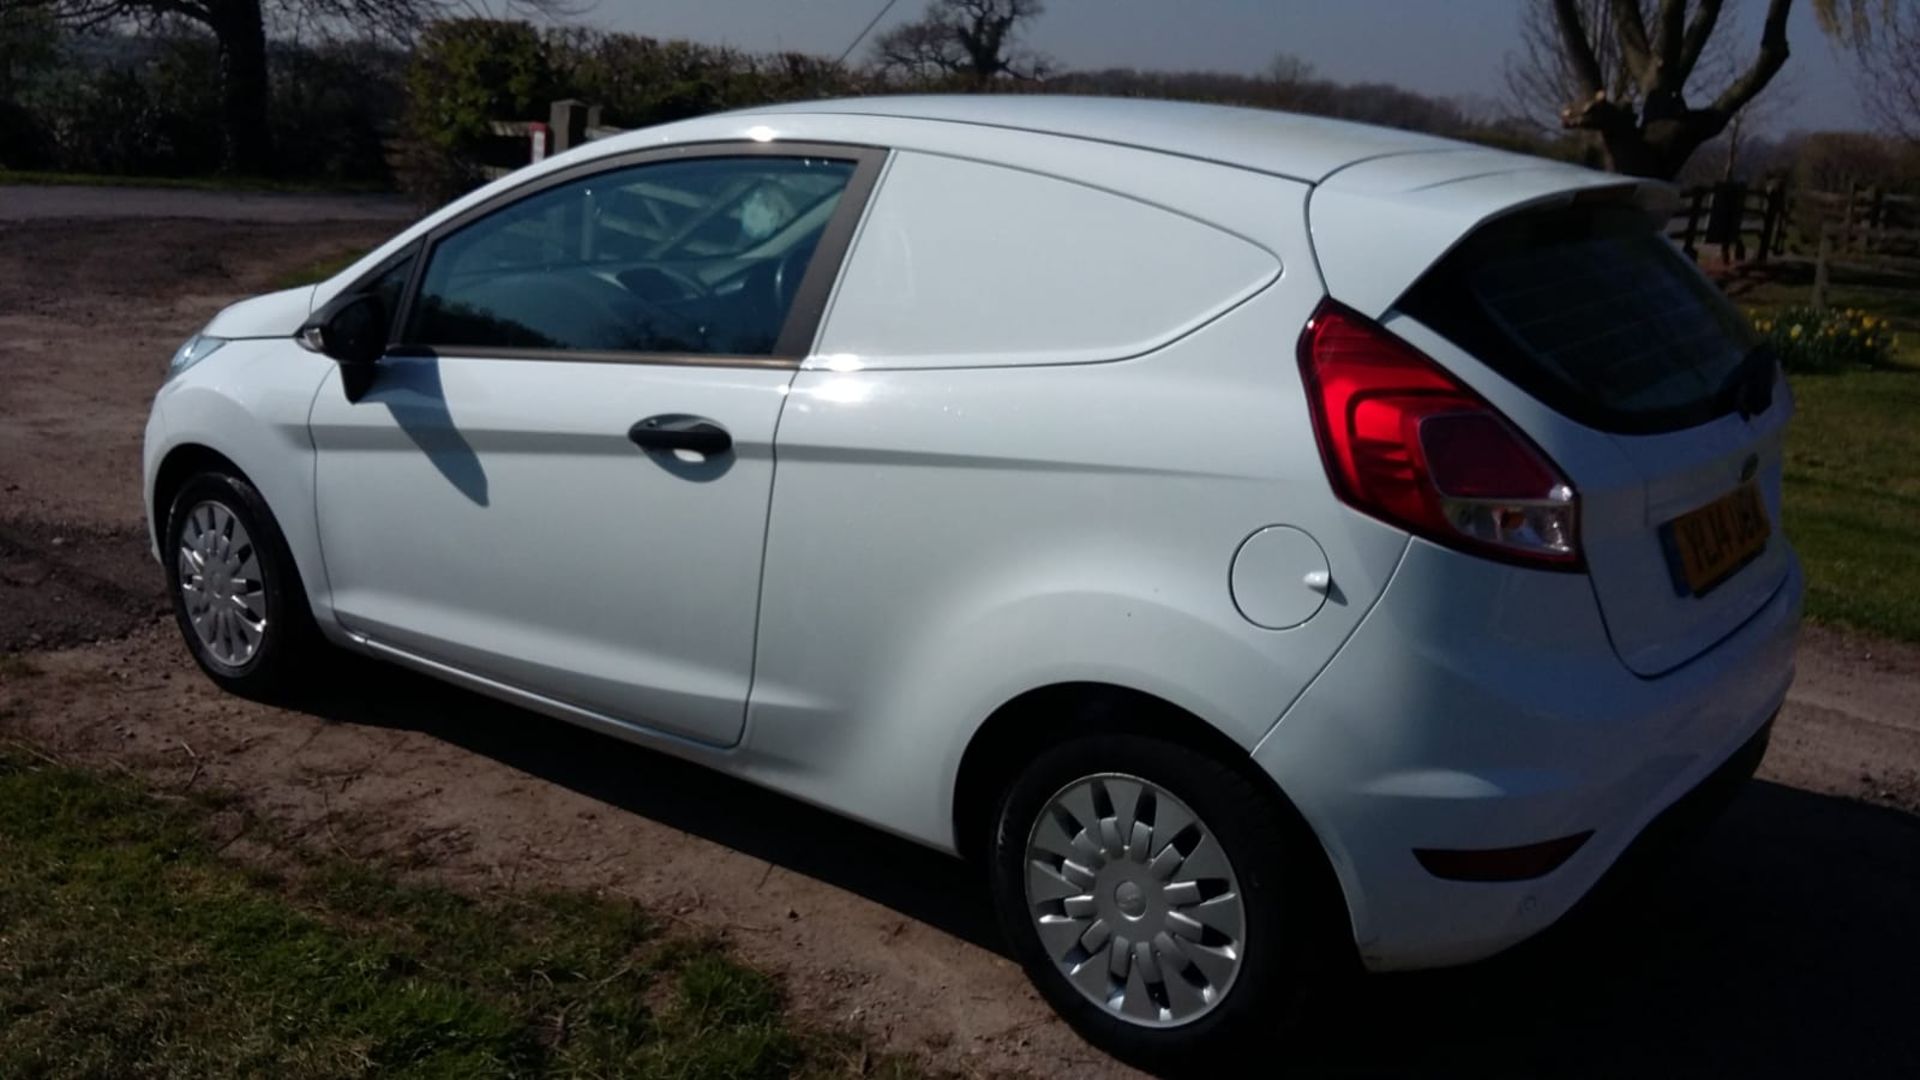 2014/14 REG FORD FIESTA ECONETIC TECH TDCI 1.6 CAR DERIVED VAN, SHOWING 0 FORMER KEEPERS *NO VAT* - Image 3 of 6